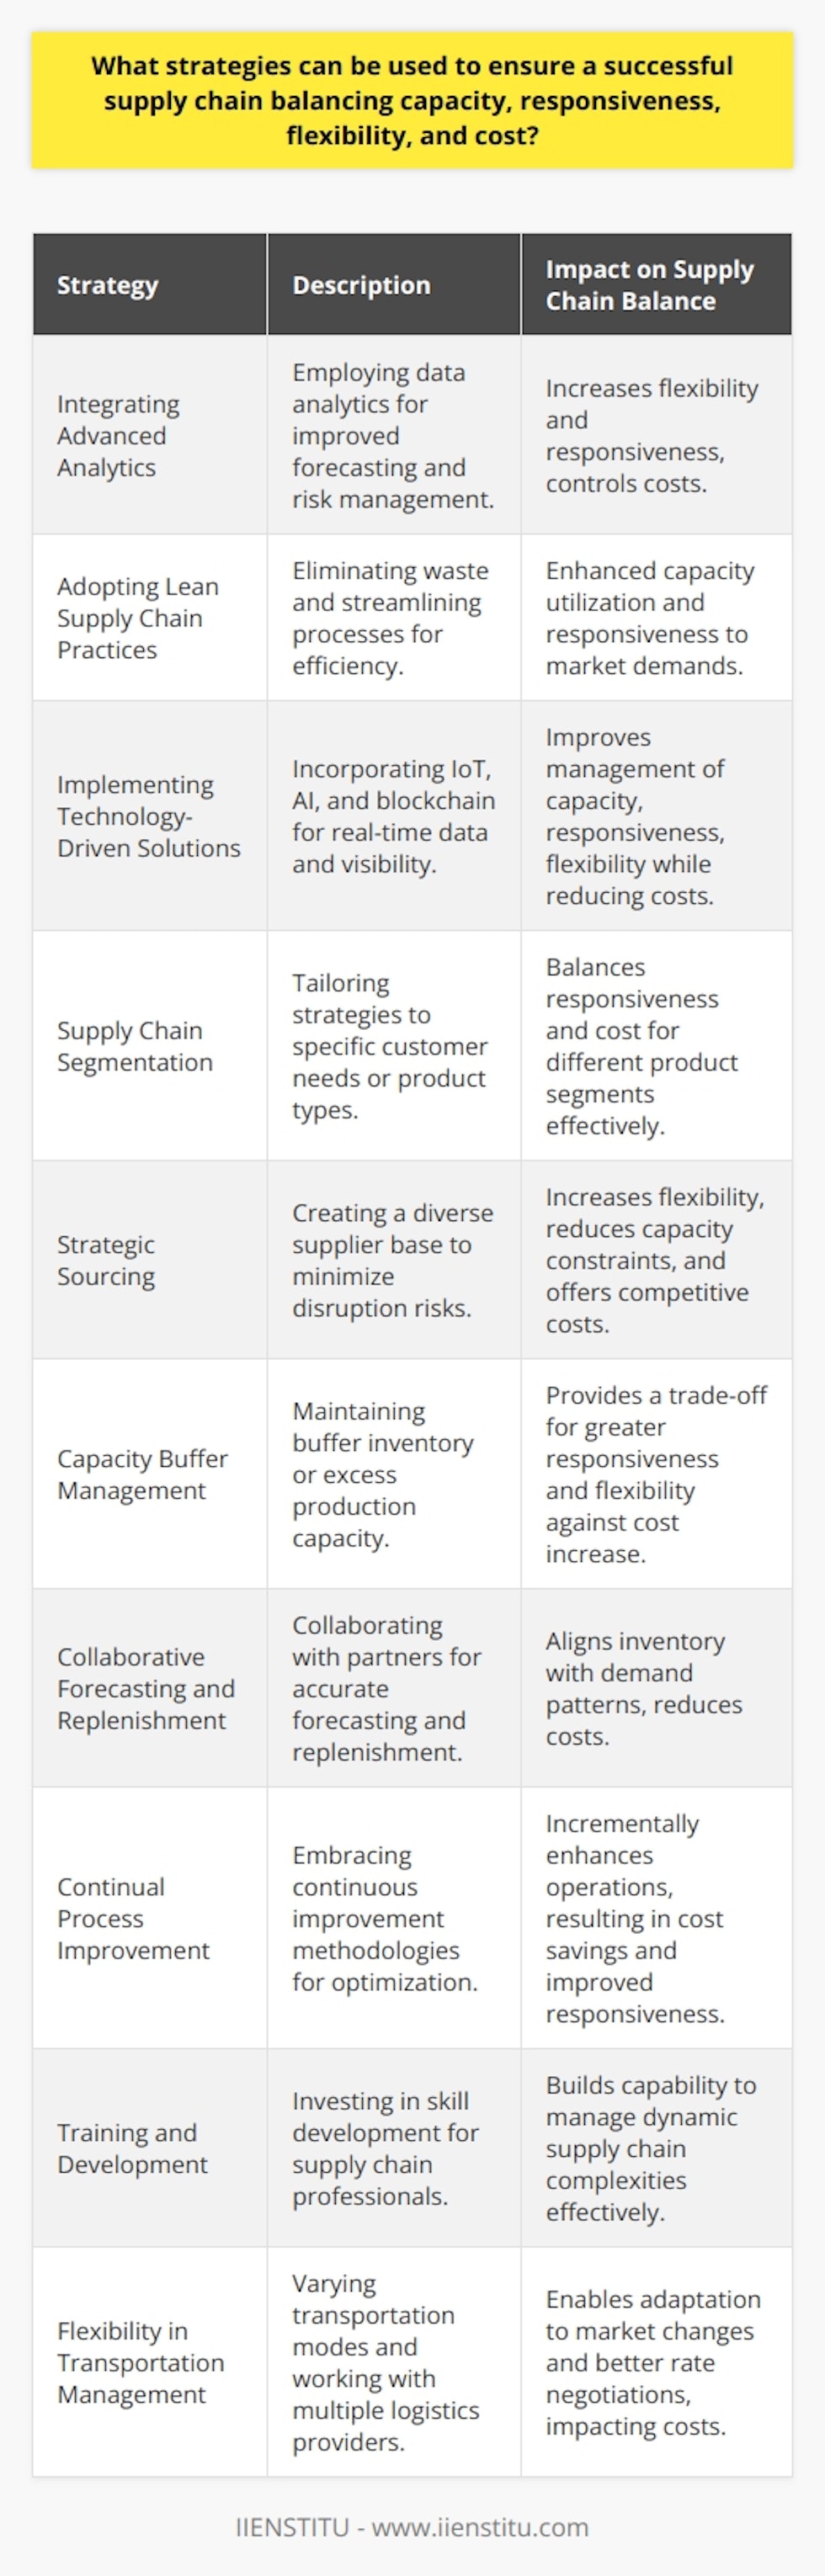 Balancing capacity, responsiveness, flexibility, and cost in a supply chain is akin to conducting a complex orchestra where every instrument has a critical role in harmony. Successful navigation of this balance can lead to enhanced competitive advantage and customer satisfaction. Here are some strategies that supply chain managers can deploy to achieve optimal balance:**1. Integrating Advanced Analytics:** Utilizing advanced data analytics tools can enable supply chains to analyze large volumes of data for better demand forecasting, capacity planning, and risk management. Through predictive analytics, organizations can anticipate market changes and adjust their supply chain operations proactively, ensuring flexibility and responsiveness while keeping costs under control.**2. Adopting Lean Supply Chain Practices:** Lean principles, focusing on eliminating waste throughout the supply chain, can lead to cost reductions and increased efficiency. By streamlining processes and removing non-value-add activities, companies can improve their capacity utilization and become more responsive to market demands.**3. Implementing Technology-Driven Solutions:** Automation and the integration of technologies such as the Internet of Things (IoT), Artificial Intelligence (AI), and blockchain can enhance visibility across the supply chain. These technologies provide real-time data that helps manage capacity, improve responsiveness, ensure more substantial flexibility, and reduce costs by enabling smarter, data-driven decision-making.**4. Supply Chain Segmentation:** Differentiating supply chain strategies based on customer need or product type allows for more tailored and efficient management of resources. By segmenting supply chains, companies can design specific approaches to balance responsiveness and cost for different product segments, leading to better overall supply chain performance.**5. Strategic Sourcing:** Developing a diverse supplier base and engaging in strategic sourcing can enhance flexibility and cushion the impact of disruptions. Multi-sourcing strategies can prevent over-reliance on a single supplier, reduce the risk of capacity constraints, and offer more competitive cost structures.**6. Capacity Buffer Management:** Keeping a strategic buffer inventory or excess production capacity can help manage unexpected demand spikes or supply disruptions. While this may increase costs, it offers a trade-off for greater responsiveness and flexibility when facing unforeseen challenges.**7. Collaborative Forecasting and Replenishment:** Engaging in collaborative planning with suppliers and customers can lead to more accurate demand forecasting and automatic replenishment systems, balancing inventory levels with demand patterns and reducing overall costs.**8. Continual Process Improvement:** Embracing a culture of continuous improvement, utilizing methodologies like Six Sigma or Kaizen, can lead to incremental enhancements in supply chain operations. Ongoing optimization can improve capacity management, responsiveness, and flexibility while driving down costs.**9. Training and Development:** Investing in training for supply chain professionals, such as courses offered by institutions like IIENSTITU, can develop the necessary skills to respond to complex supply chain challenges. A knowledgeable team is crucial for managing the dynamic nature of modern supply chains effectively.**10. Flexibility in Transportation Management:** Utilizing a mix of transportation modes and developing relationships with multiple logistics providers can offer the flexibility required to adapt to changing market conditions. This approach also provides leverage when negotiating rates, thus influencing cost management.In practice, successful supply chain balancing is not a 'set-and-forget' process. It demands constant monitoring, timely adjustments, and a forward-looking perspective. By employing these strategies, supply chain managers can navigate the intricate interdependencies of capacity, responsiveness, flexibility, and cost, securing their organisation’s position in an ever-evolving global market.